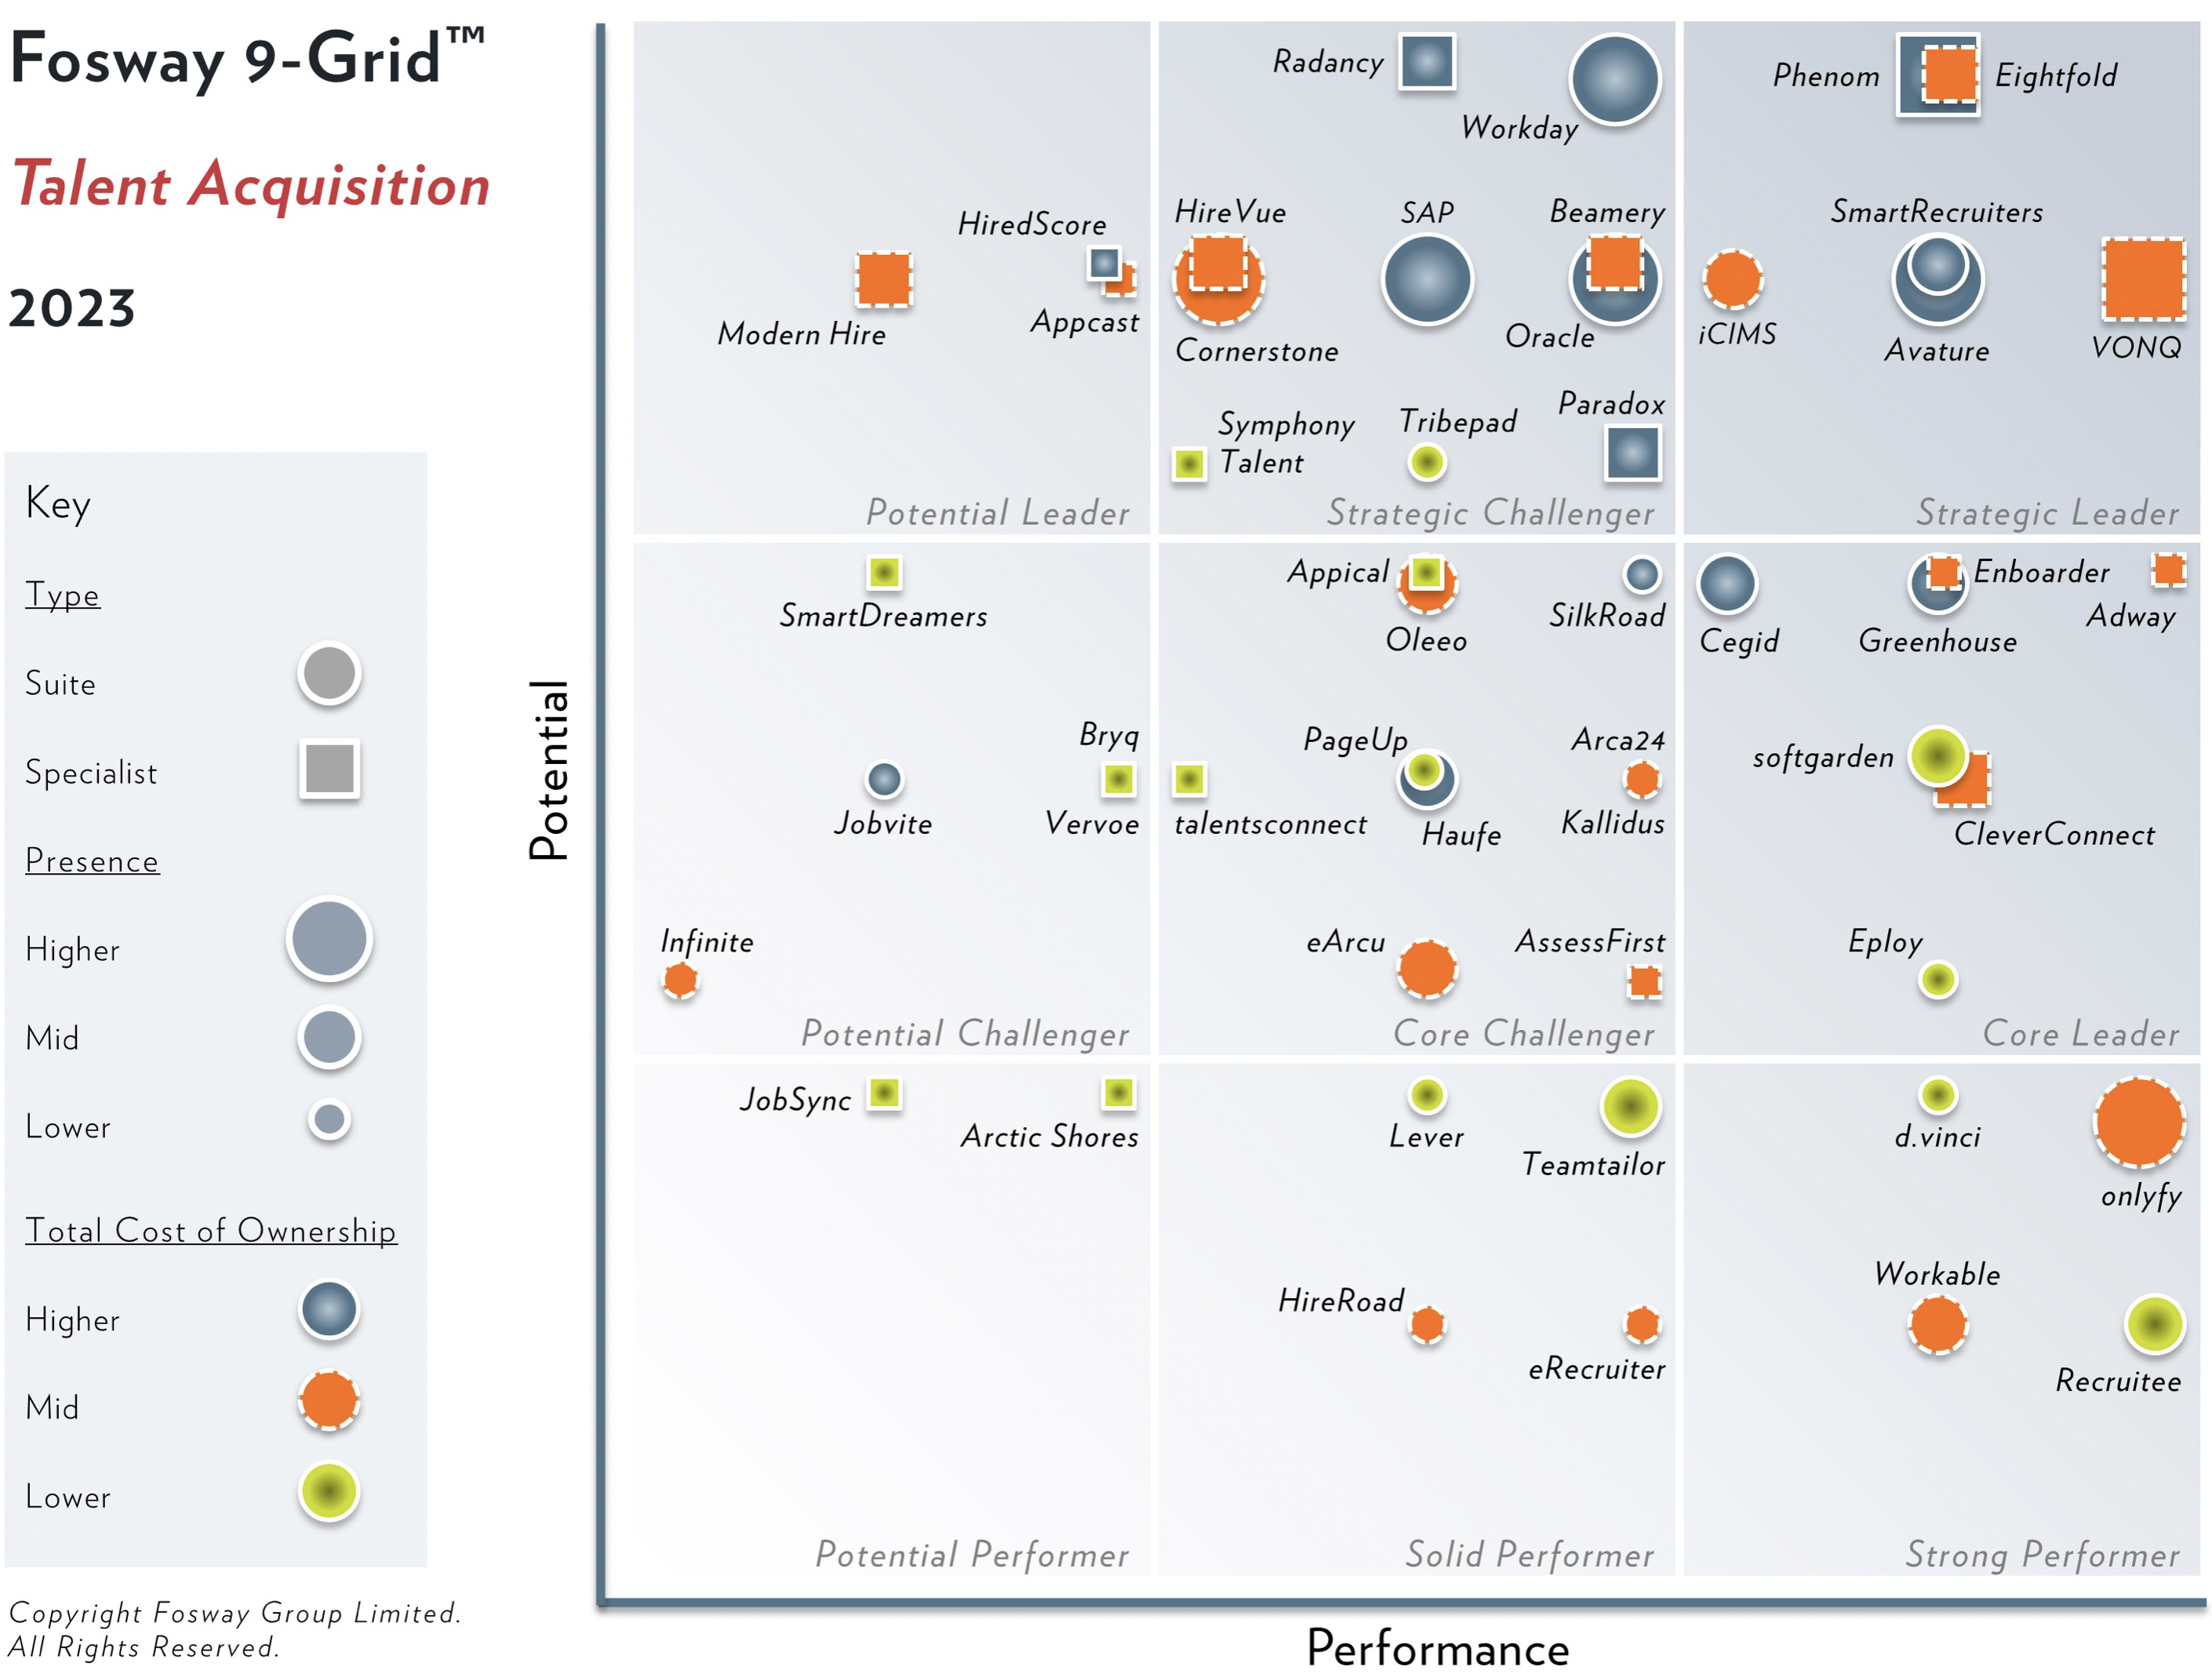 Fosway 9-Grid™ Talent Acquisition 2023